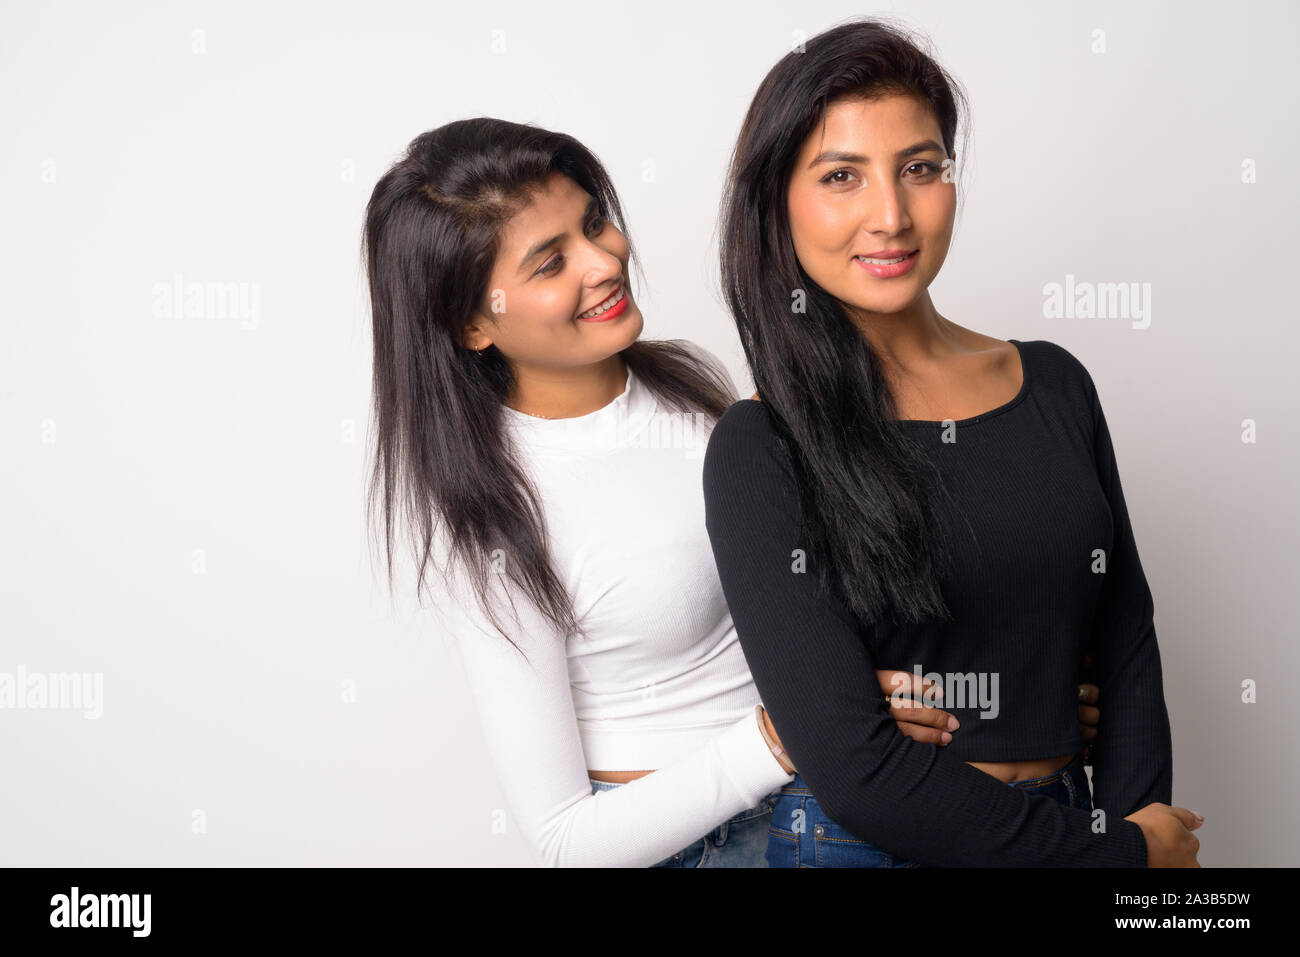 Two happy young beautiful Persian women embracing together Stock Photo